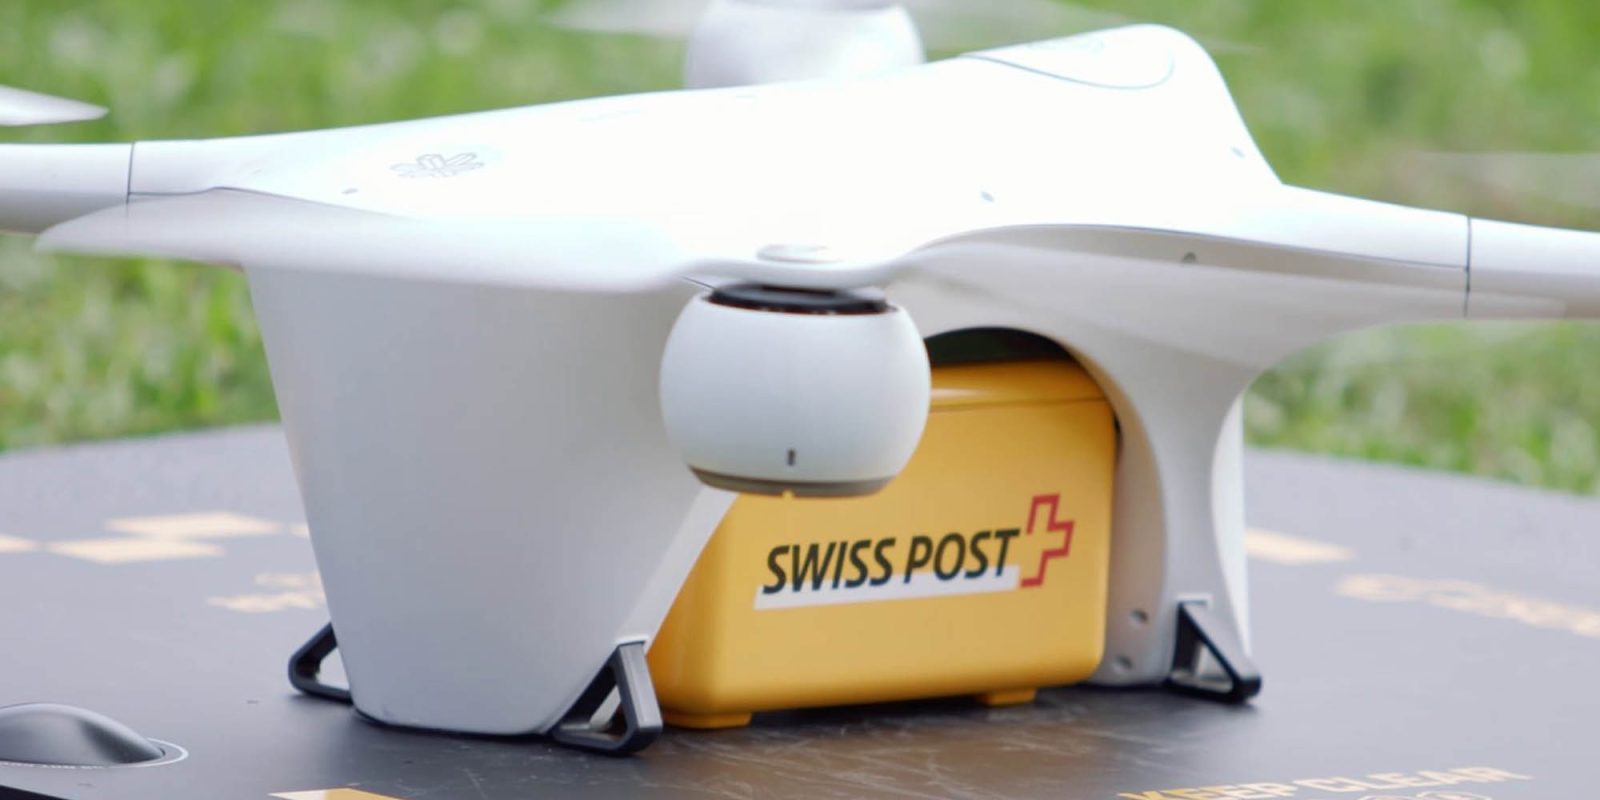 Swiss Post drone delivery